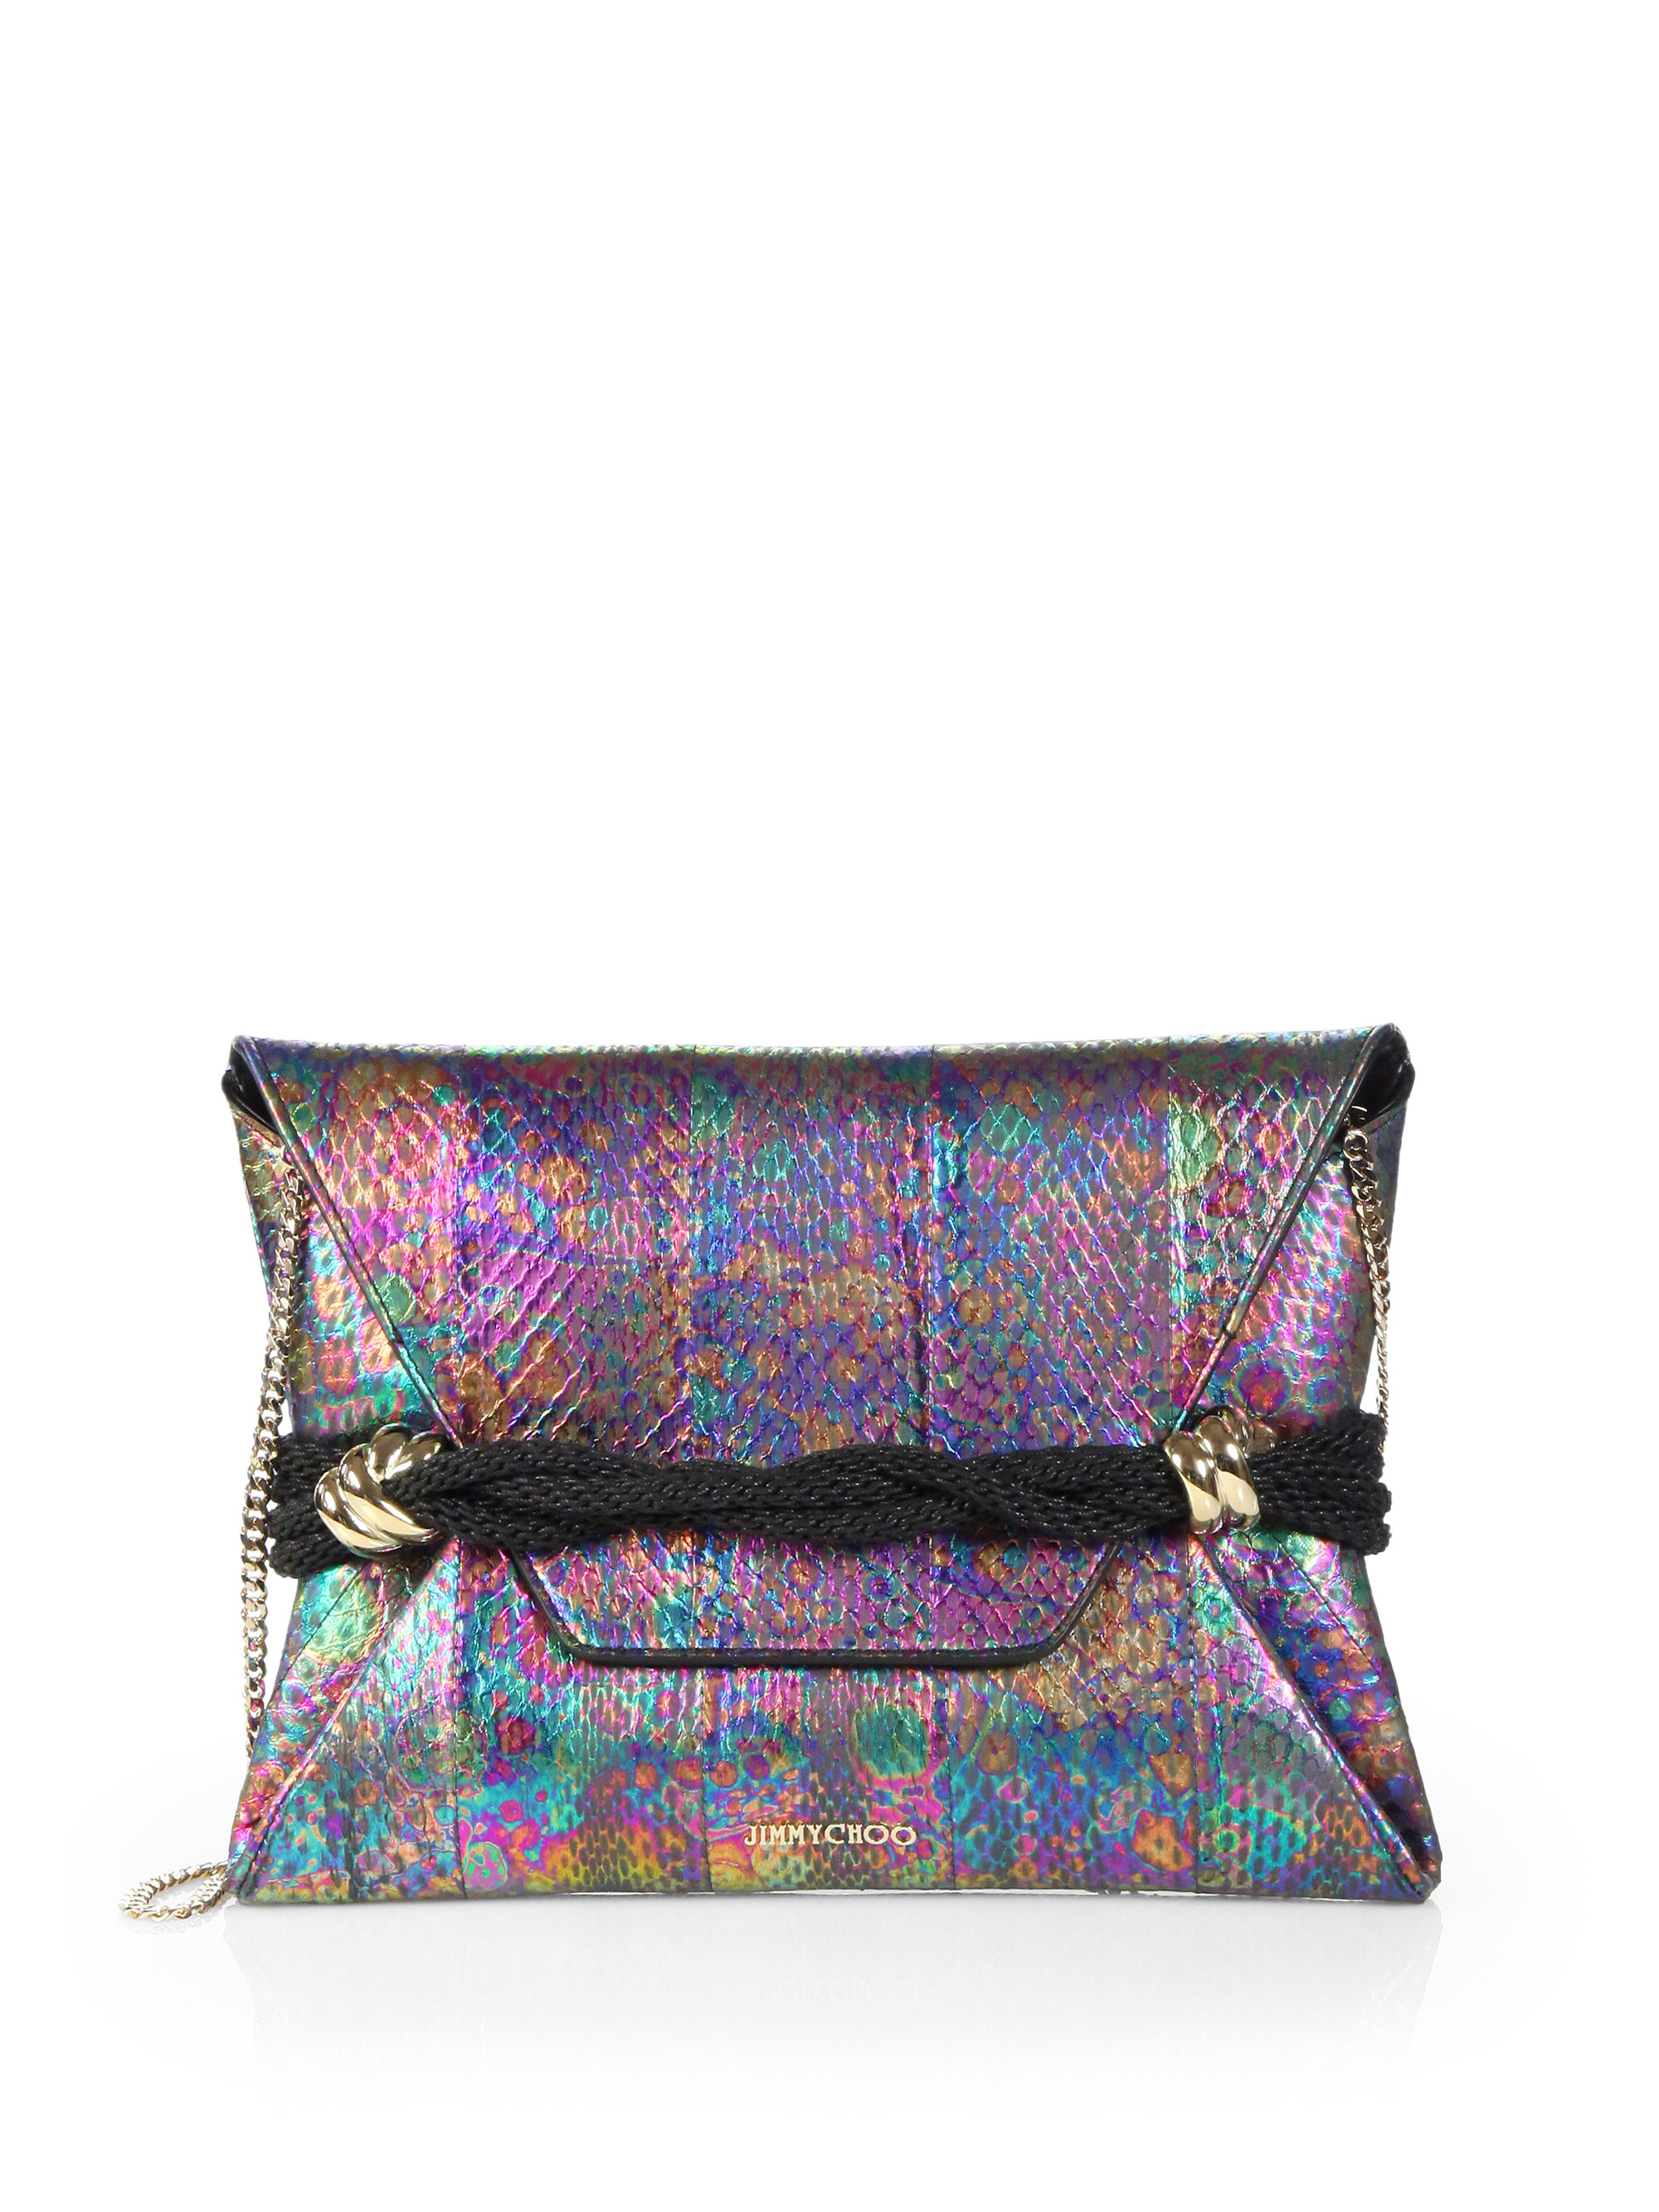 Lyst - Jimmy Choo Holographic Snakeskin Convertible Clutch in Purple